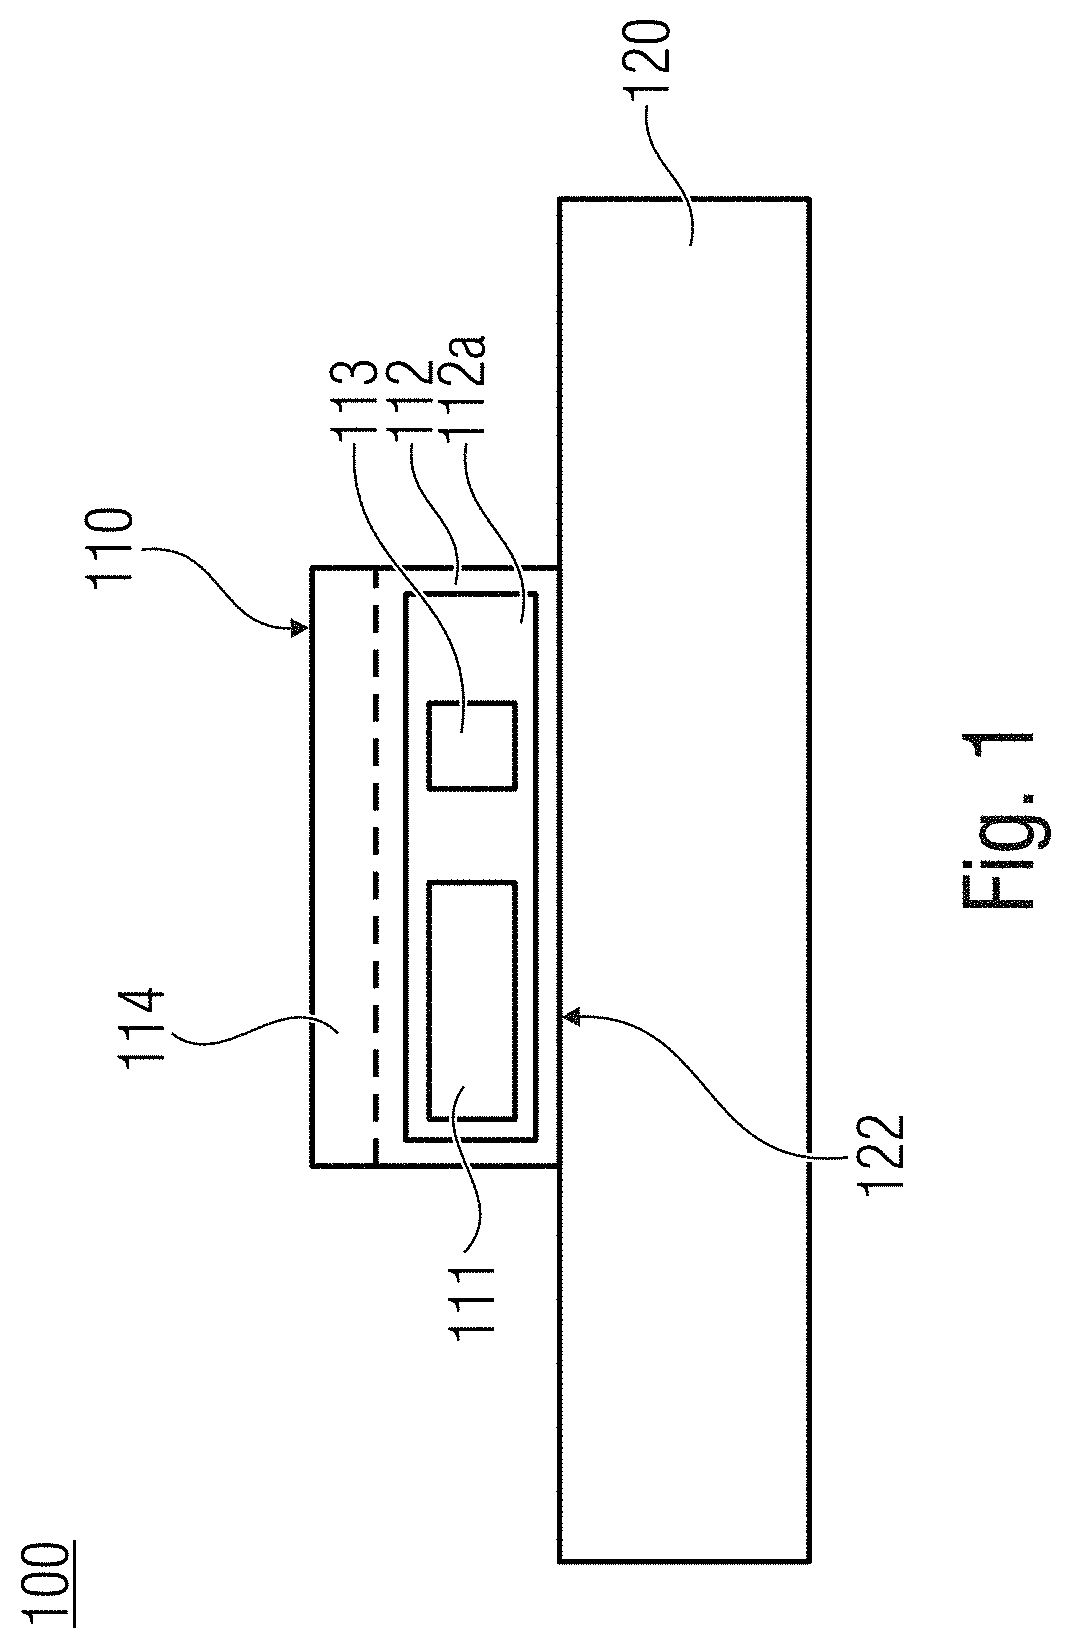 Ferroelectric semiconductor device and method for producing a memory cell